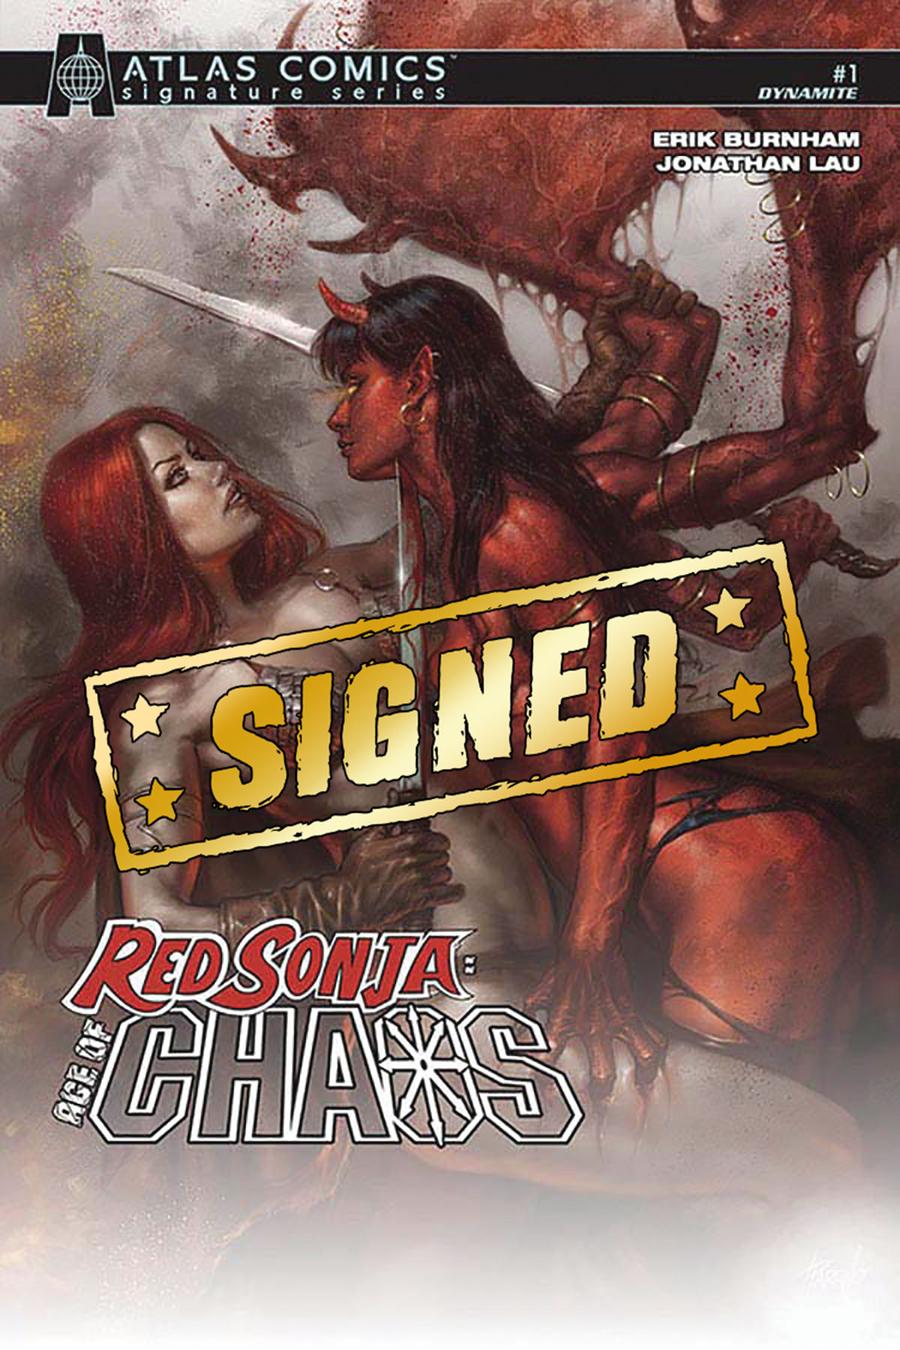 Red Sonja Age Of Chaos #1 Cover Y Atlas Comics Signature Series Signed By Erik Burnham